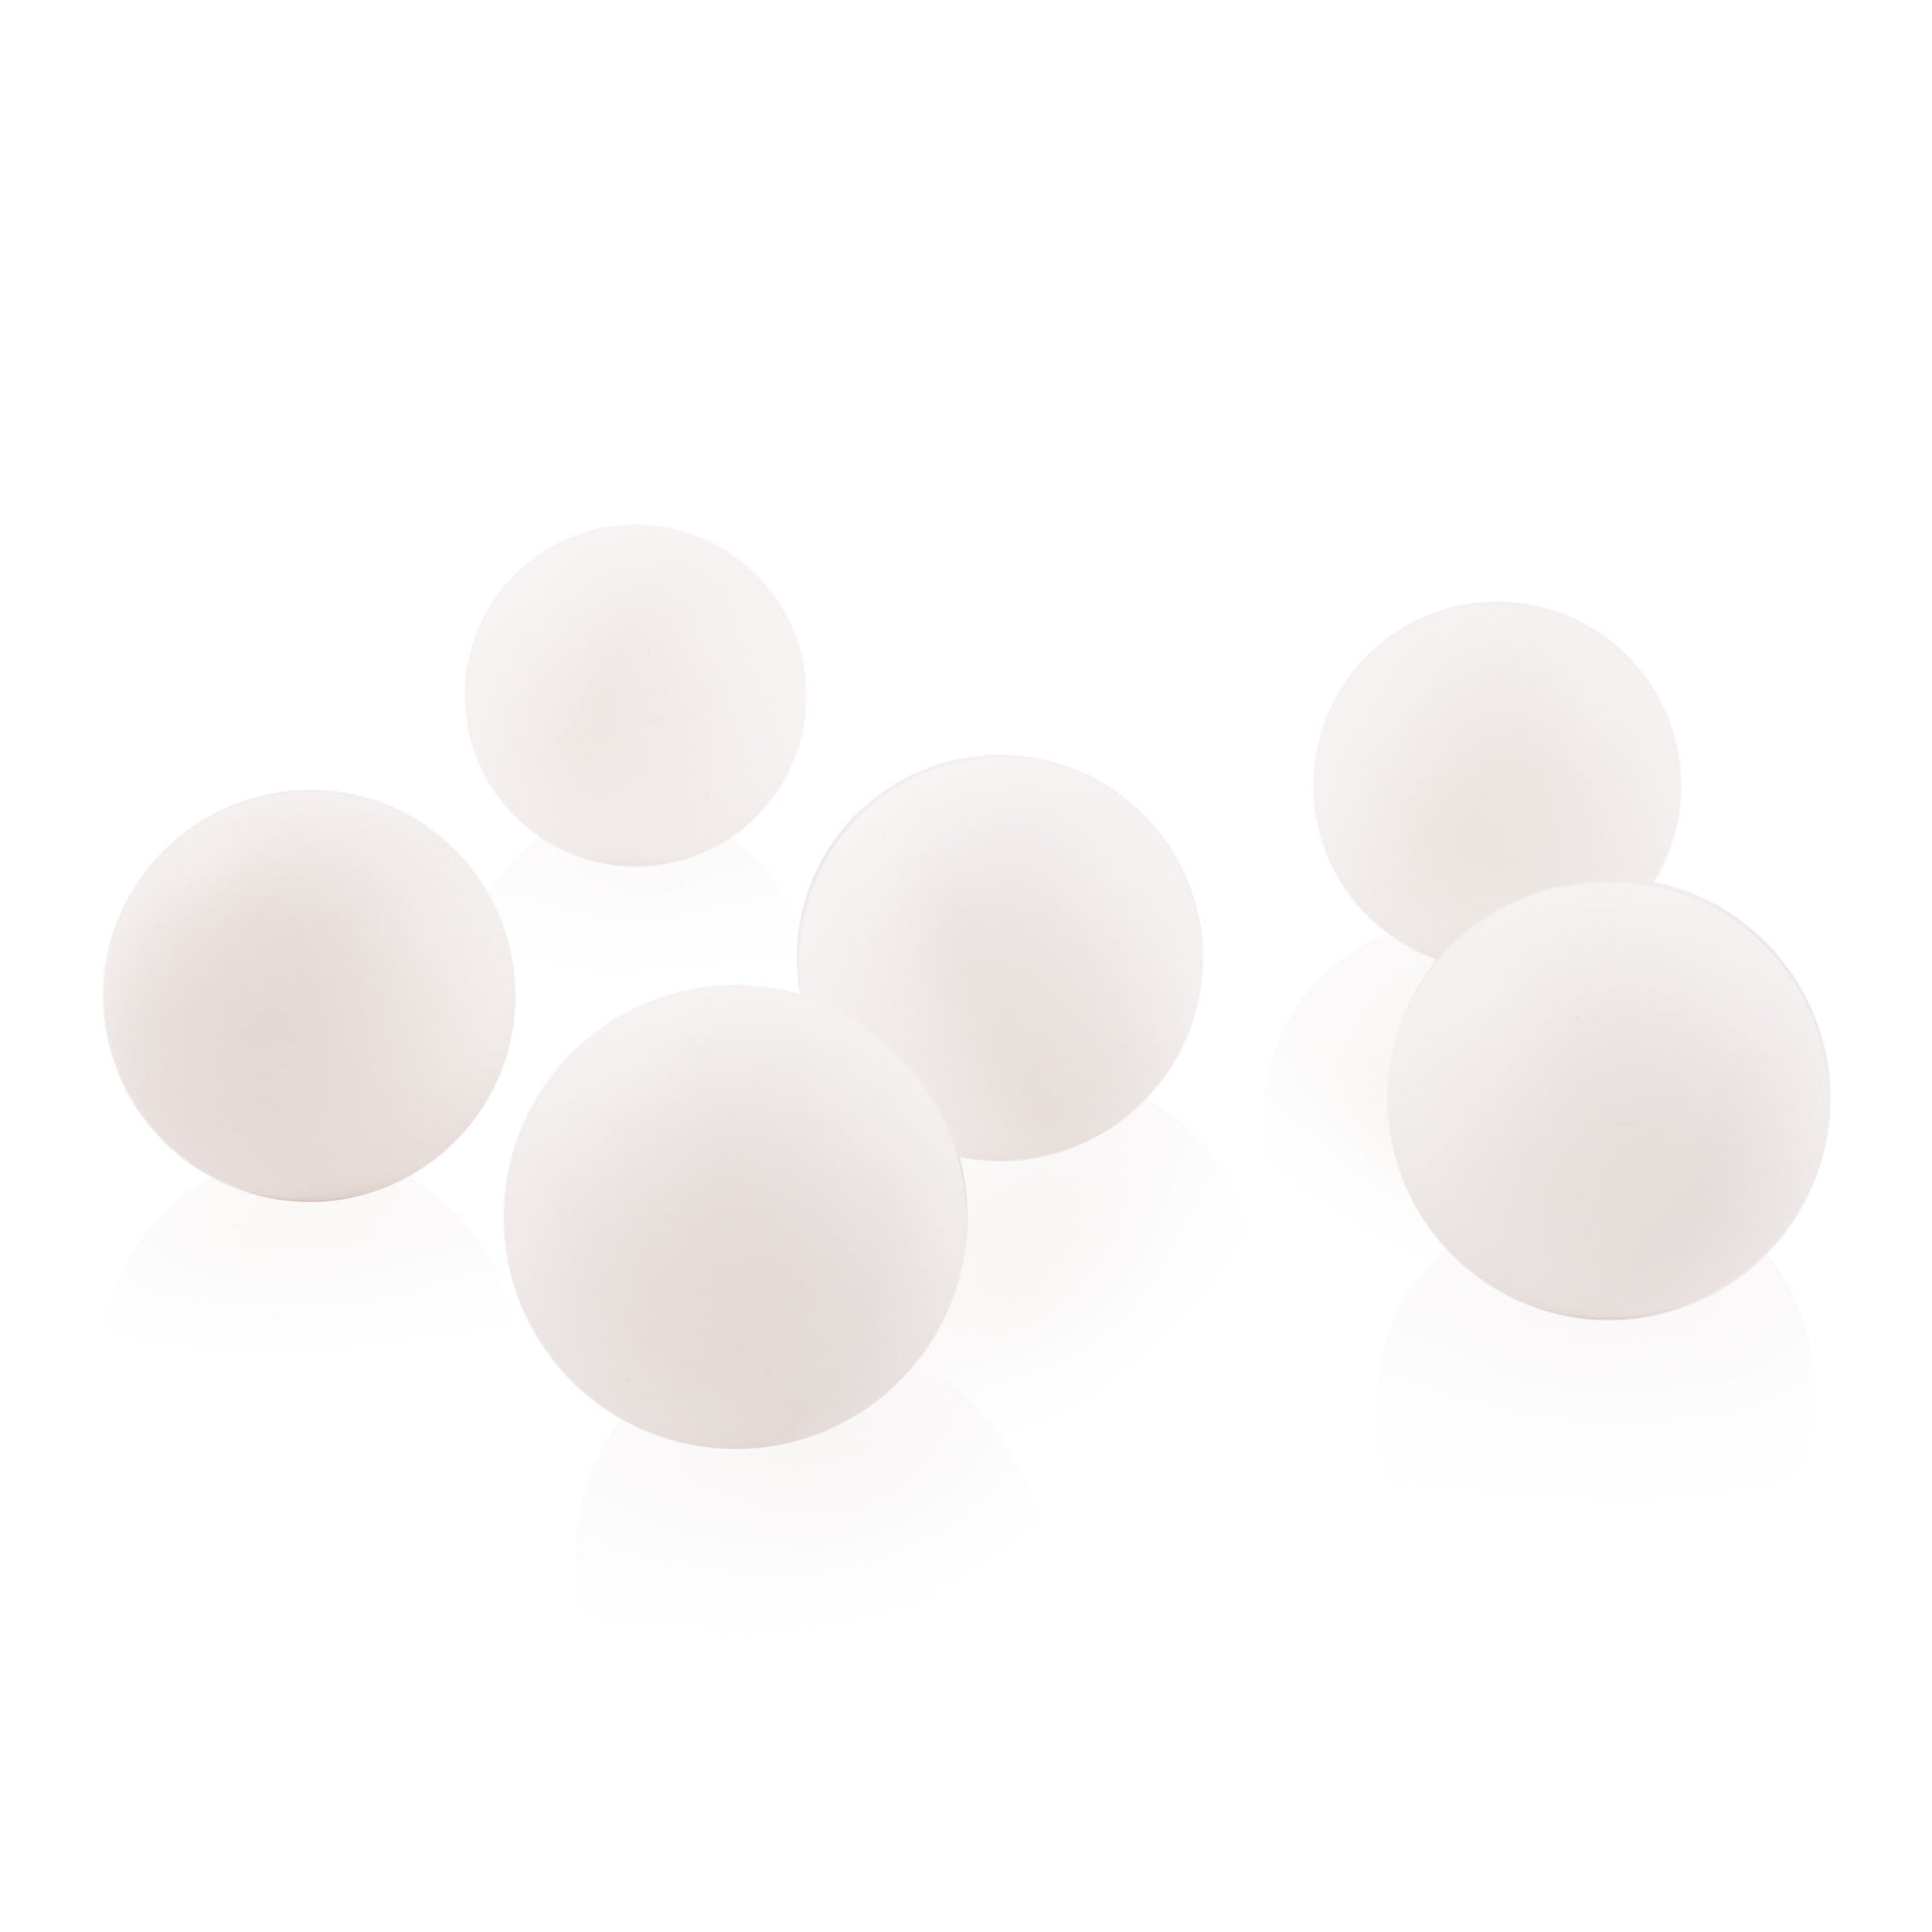 Durable 100/150PC 40MM Olympic Table Tennis White/Yellow Ping Pong Balls Hot 